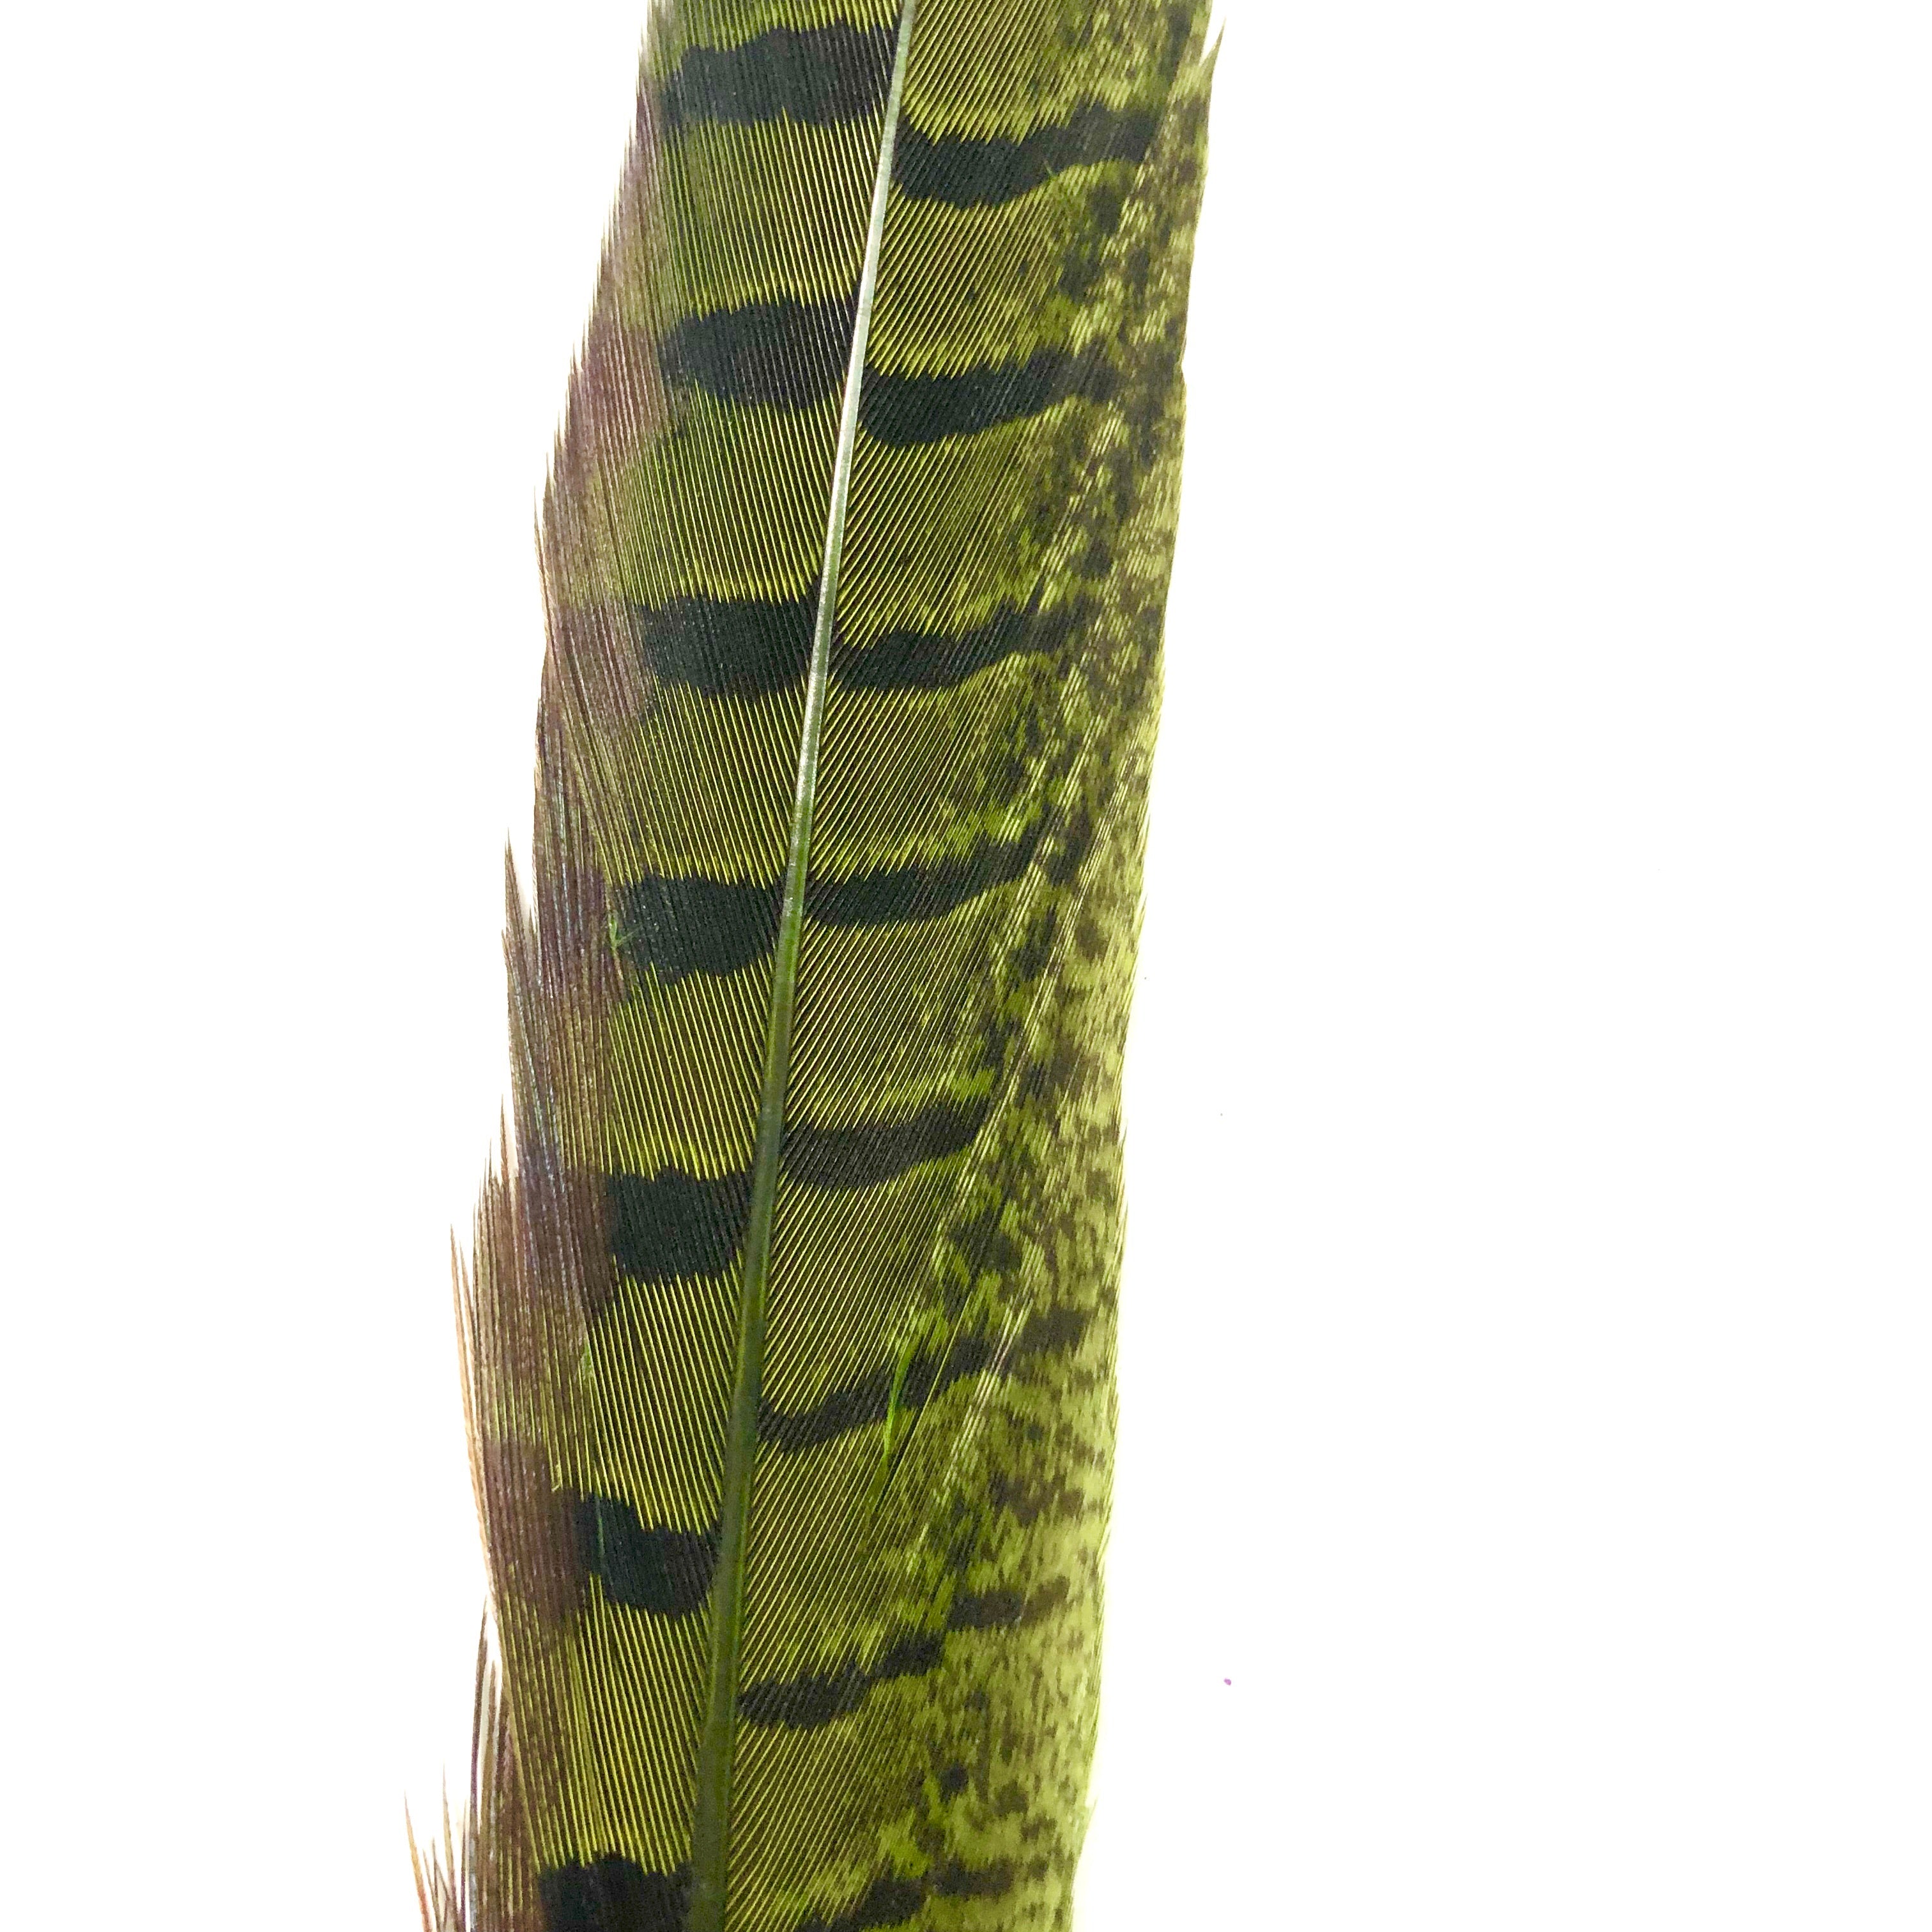 6" to 10" Ringneck Pheasant Tail Feather x 10 pcs - Lime Green